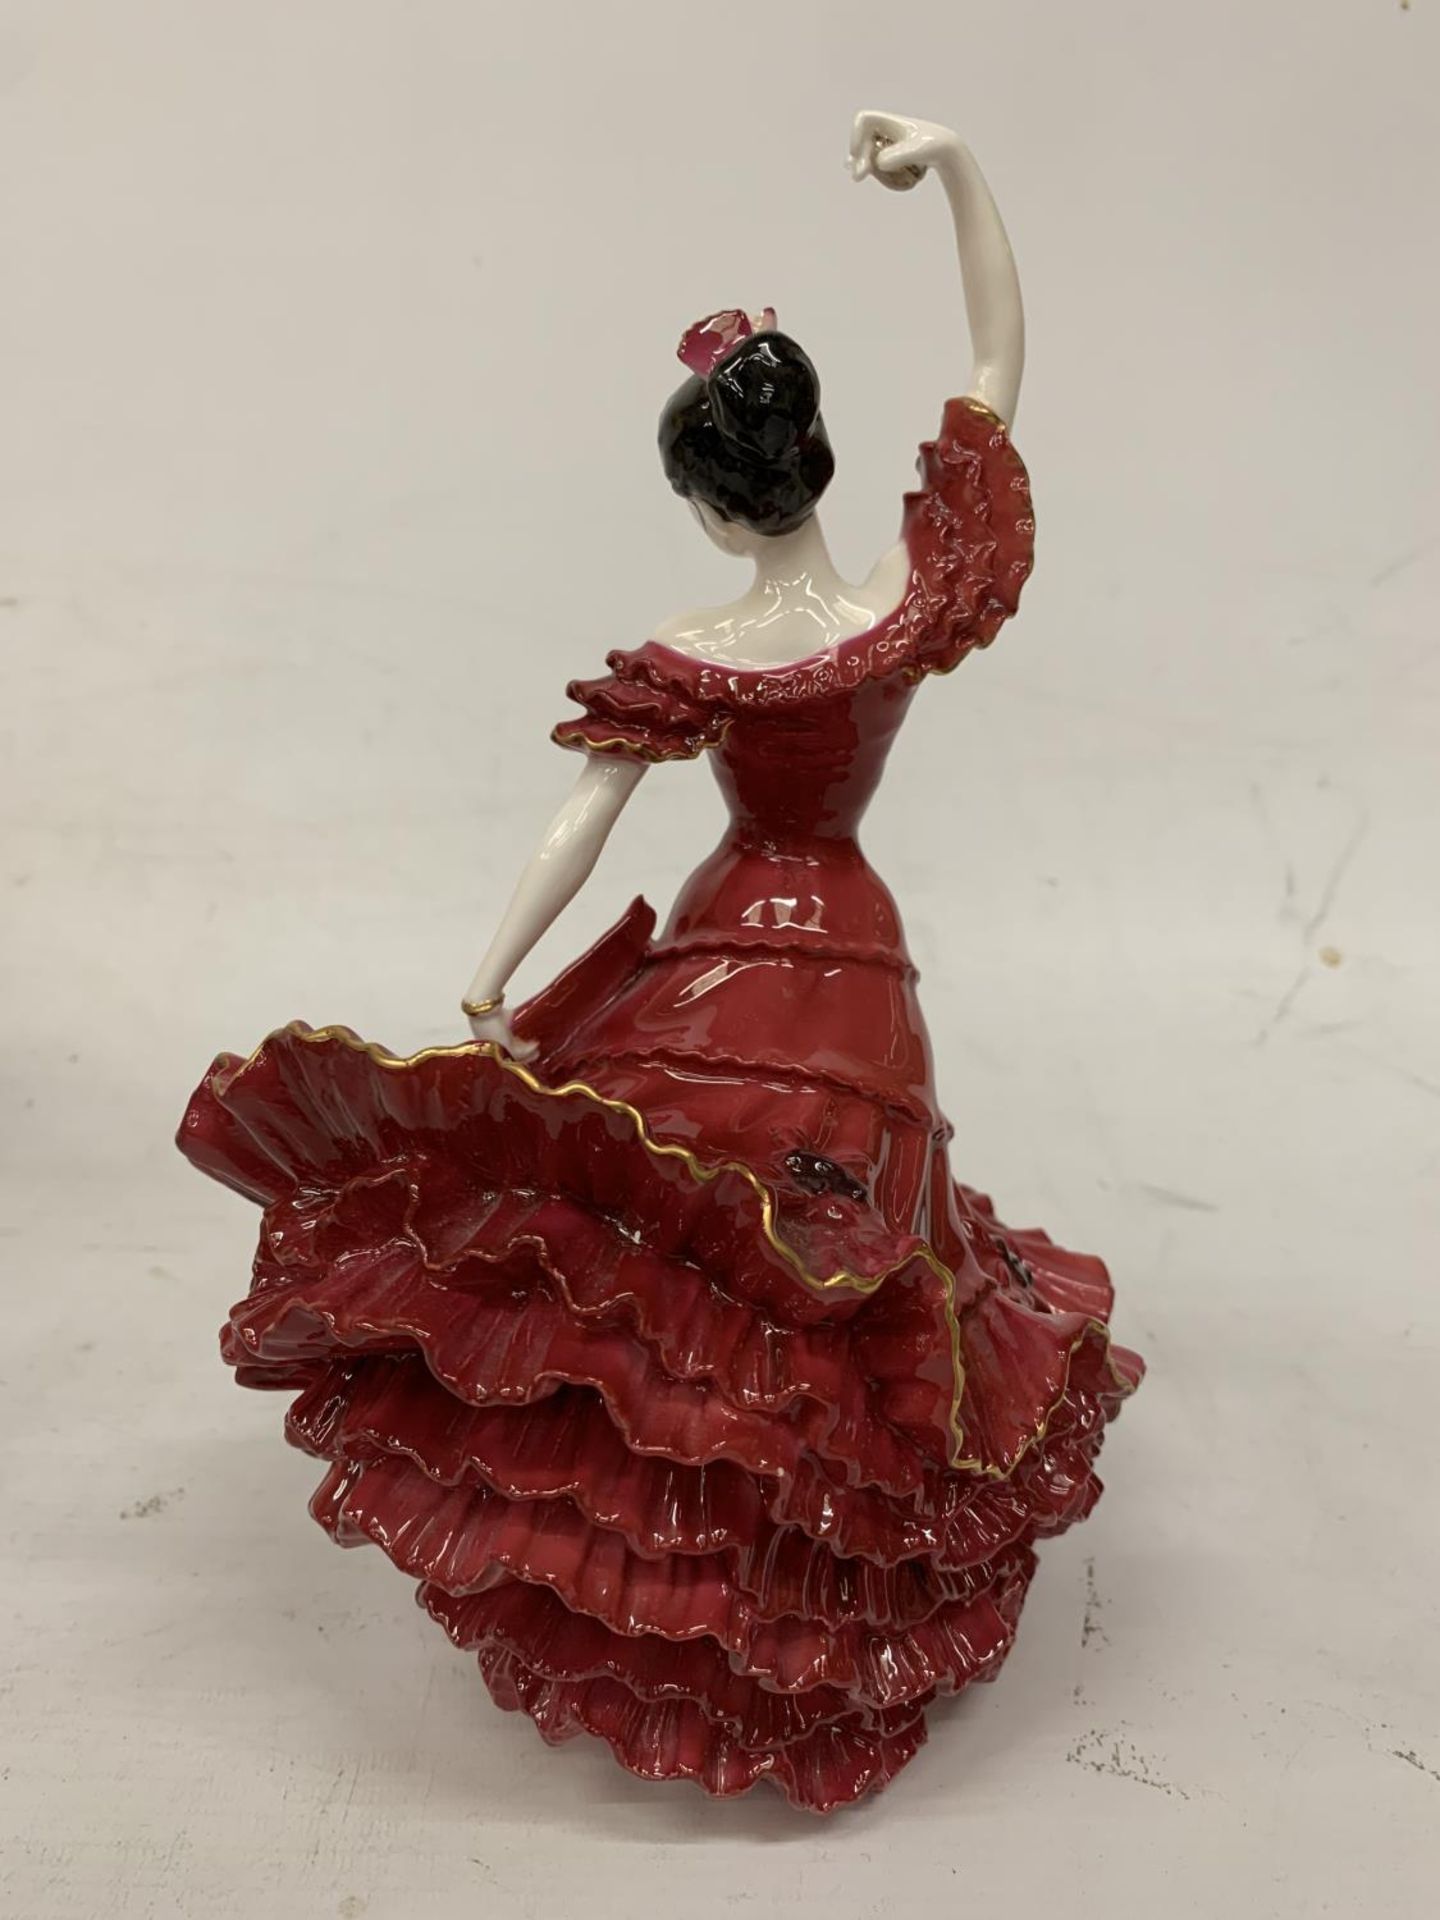 A COALPORT FIGURINE "FLAMENCO" FROM THE COLLECTION A PASSION FOR DANCE ISSUED IN A LIMITED EDITION - Image 3 of 5